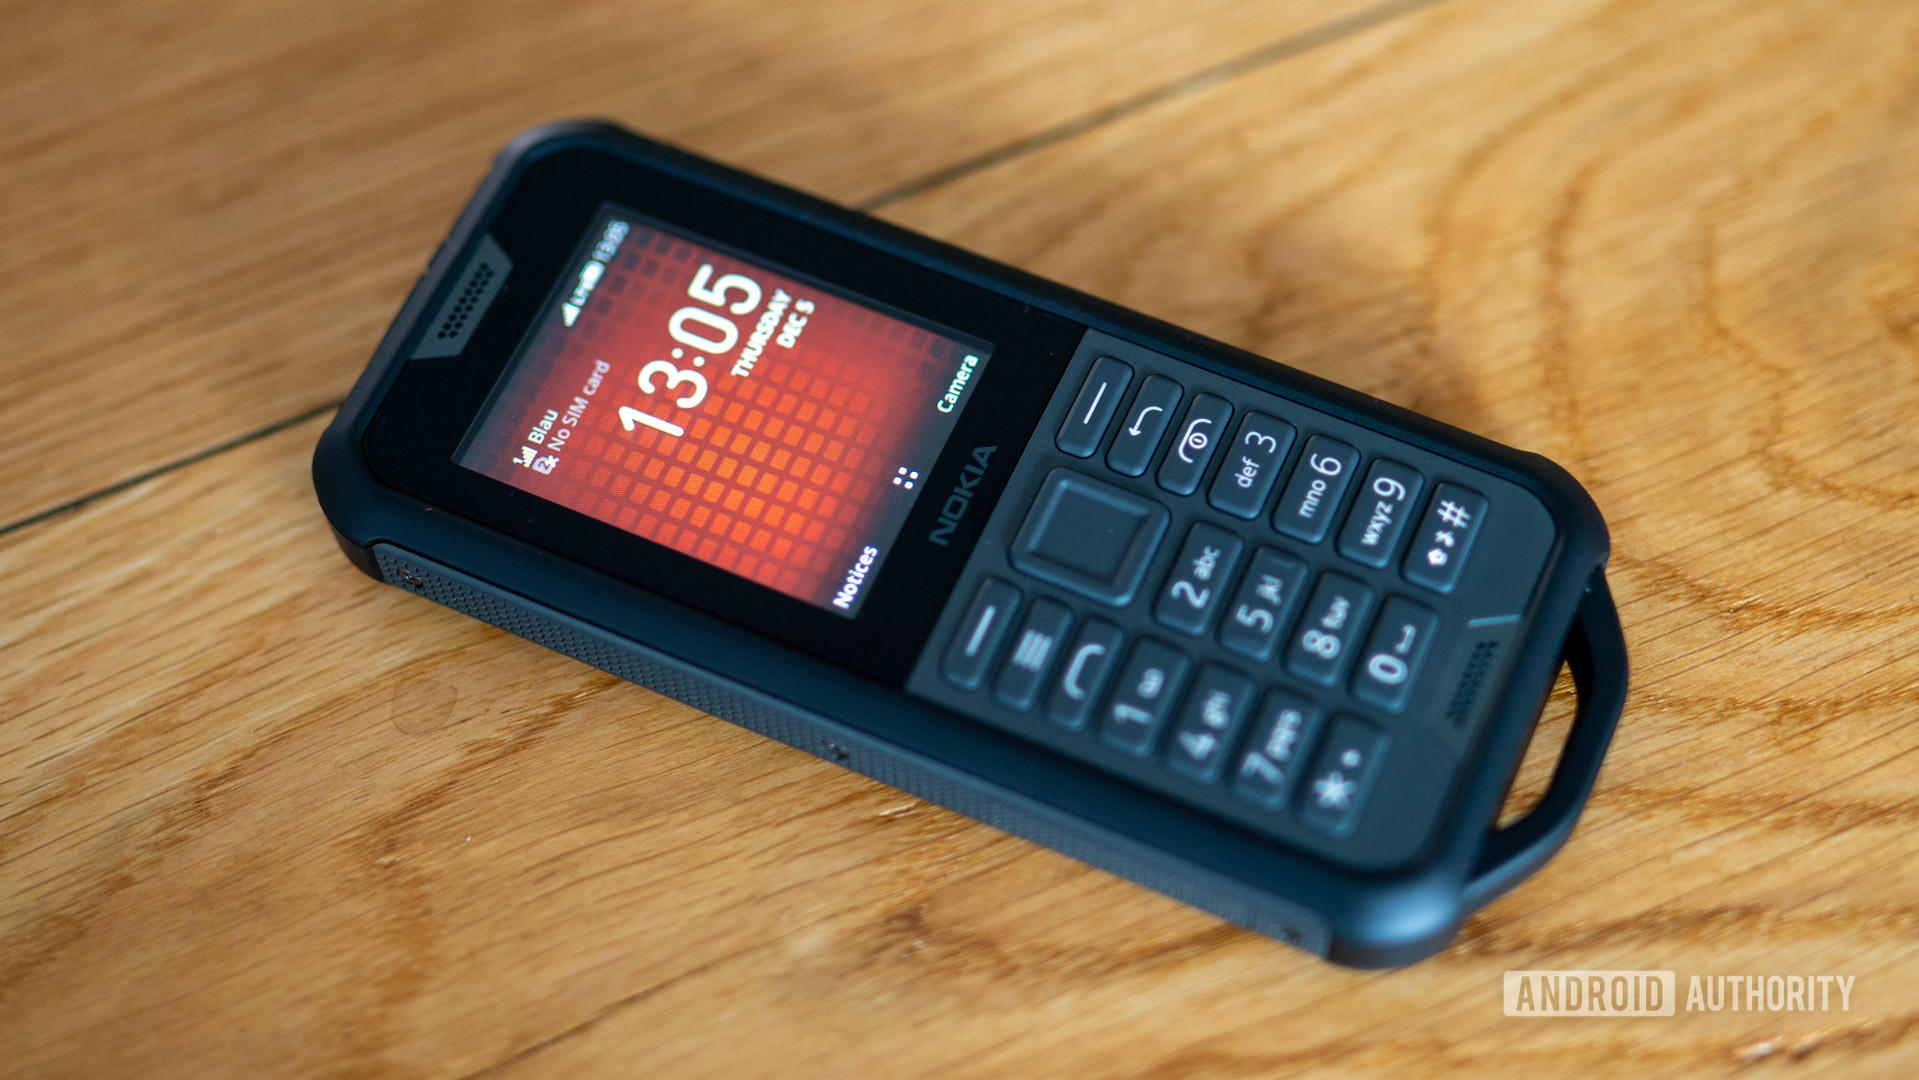 Nokia 800 Tough review feature phone on table